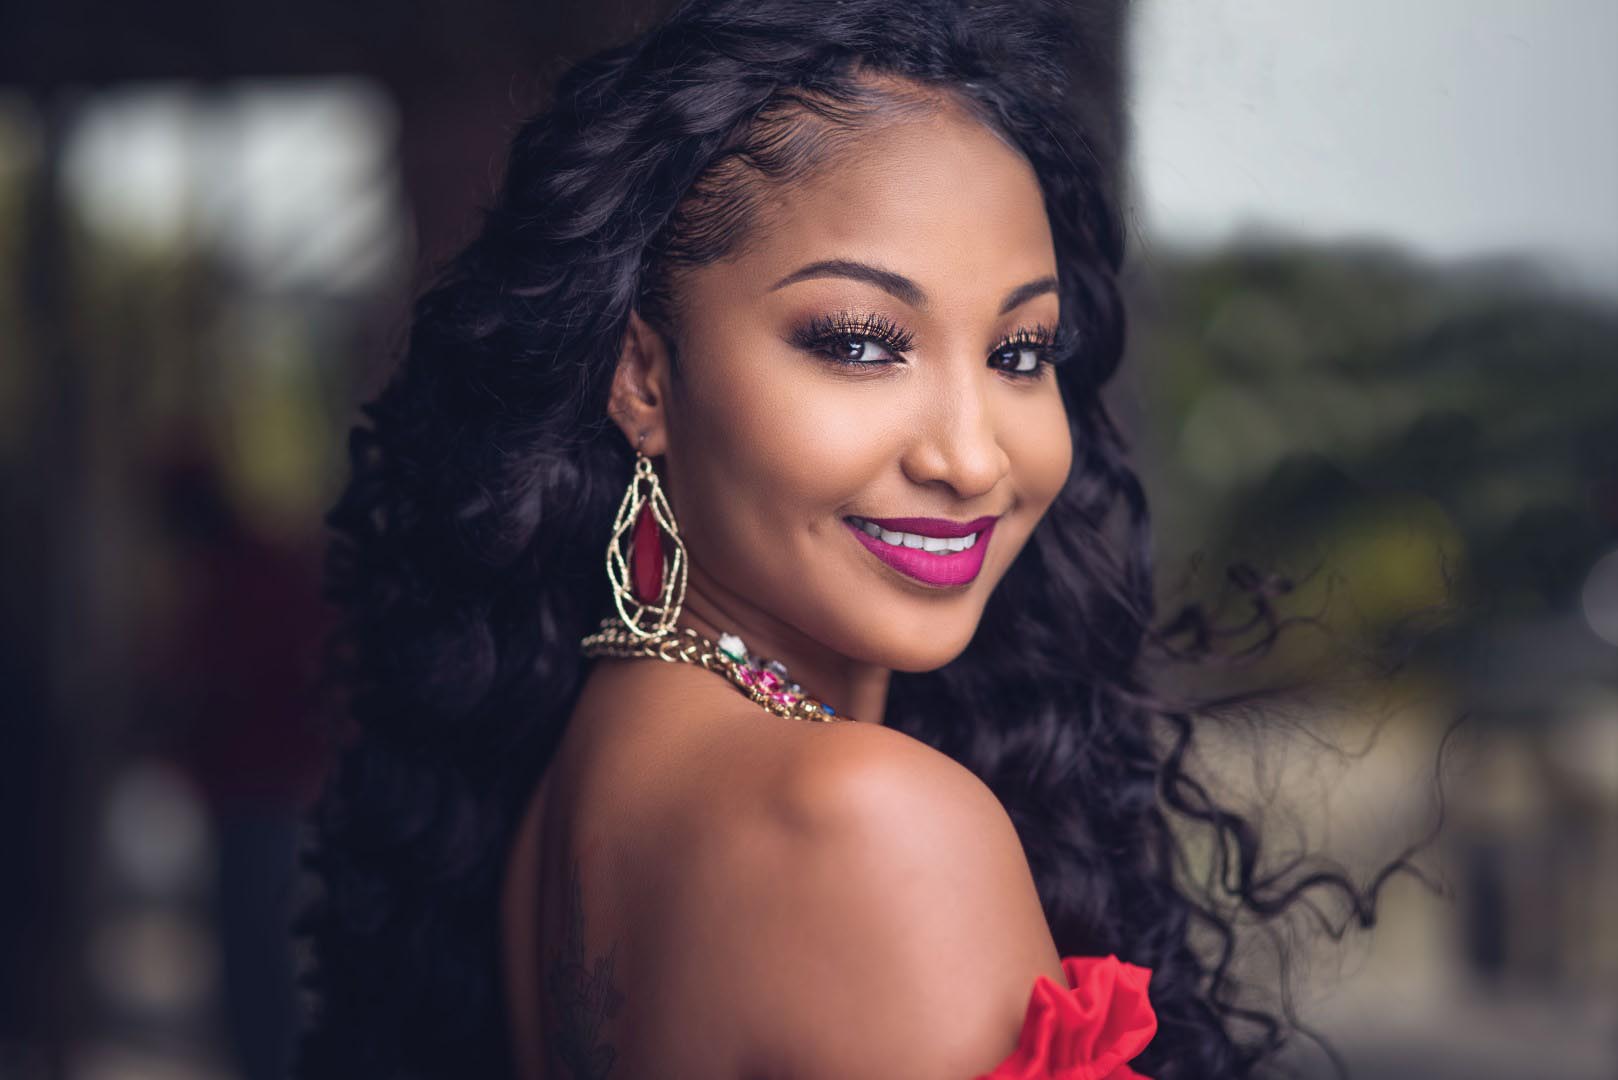 Having Fun Pan di Grill Throwback: Shenseea - The World is Hers for the Taking